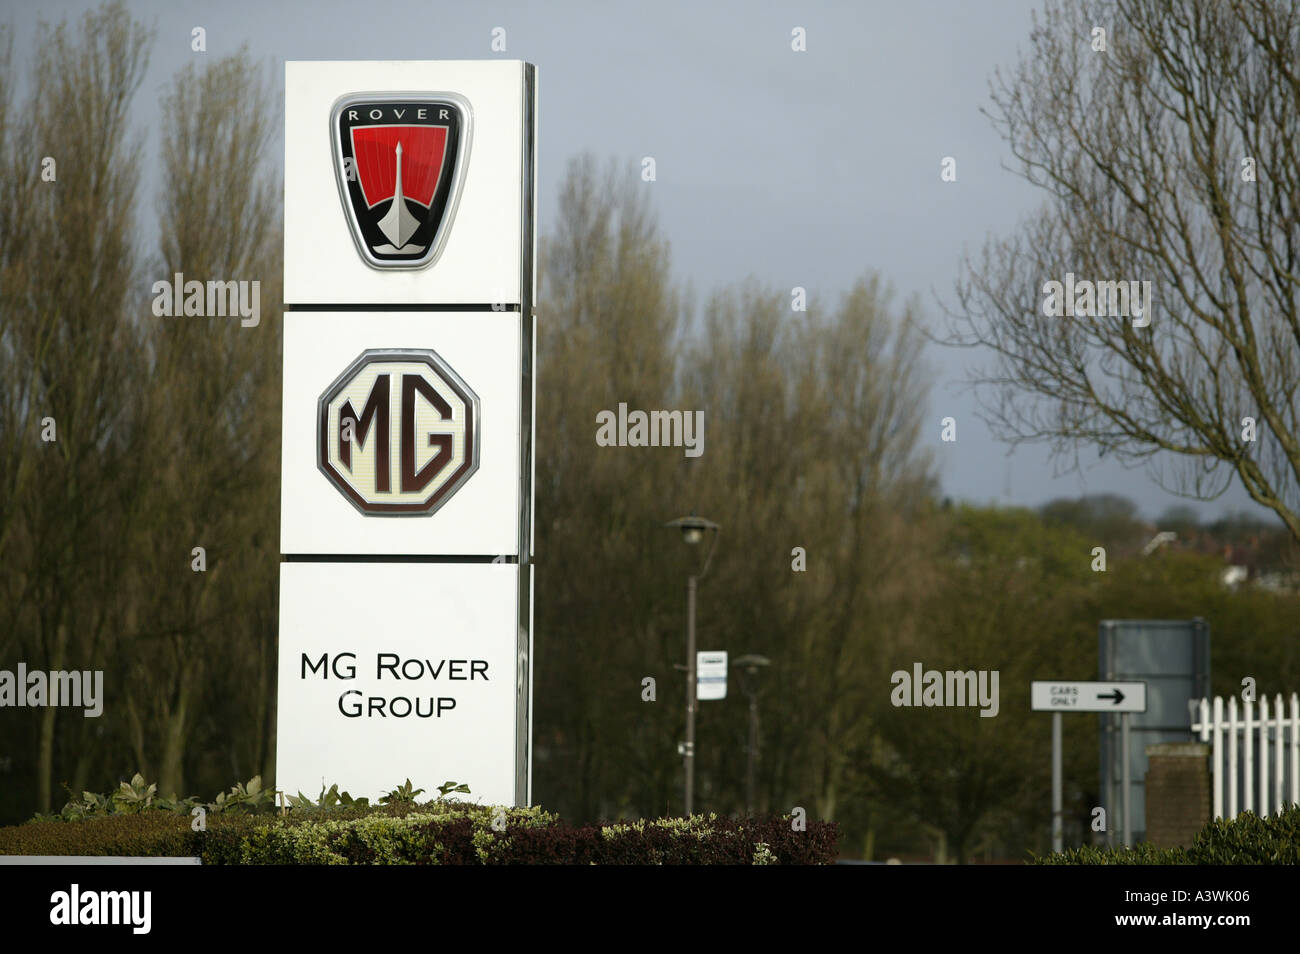 Mg rover group hi-res stock photography and images - Alamy